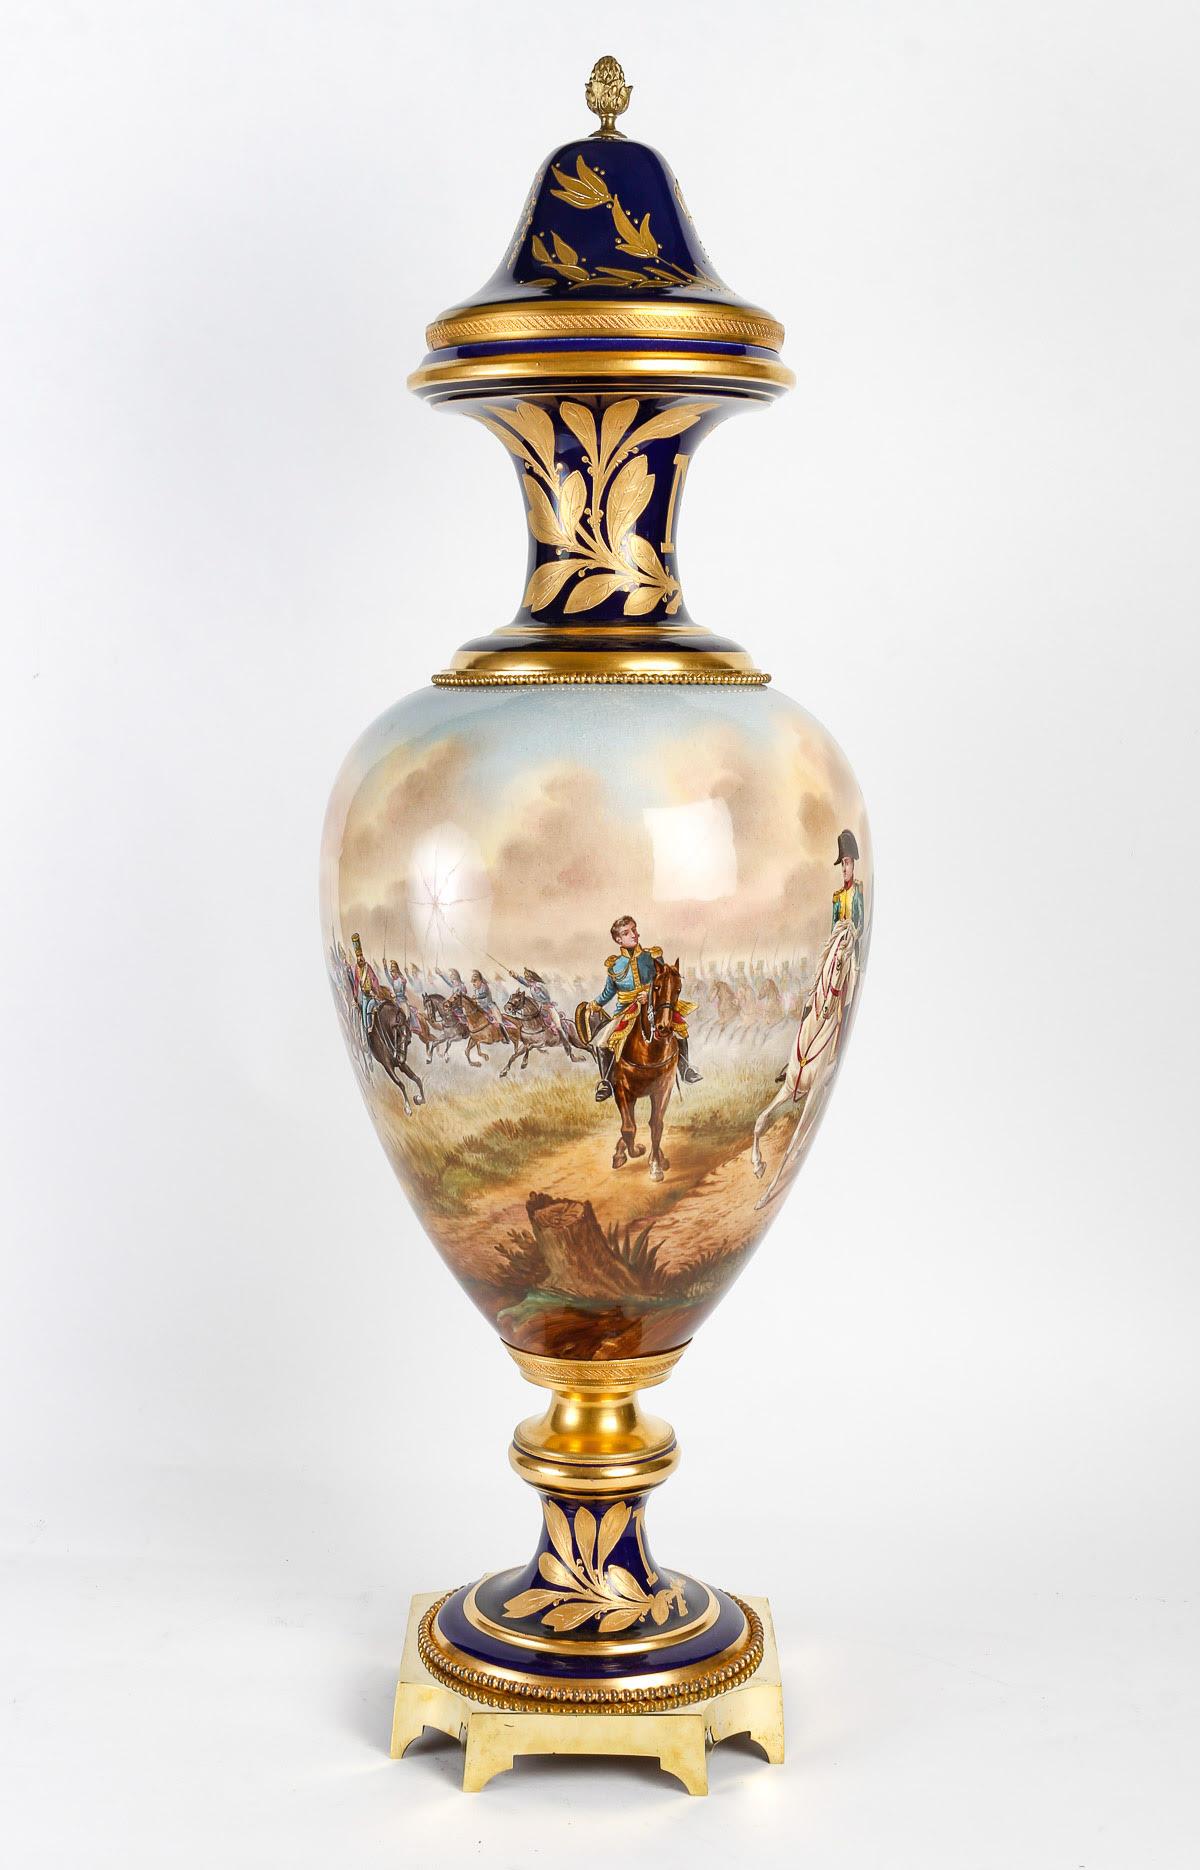 Large Sèvres porcelain and gilt bronze vase.

A large Sèvres porcelain and gilt bronze vase decorated with Napoleon 1st at the battle of 1809, signed, 19th century, Napoleon III.

H: 86cm, D: 32cm